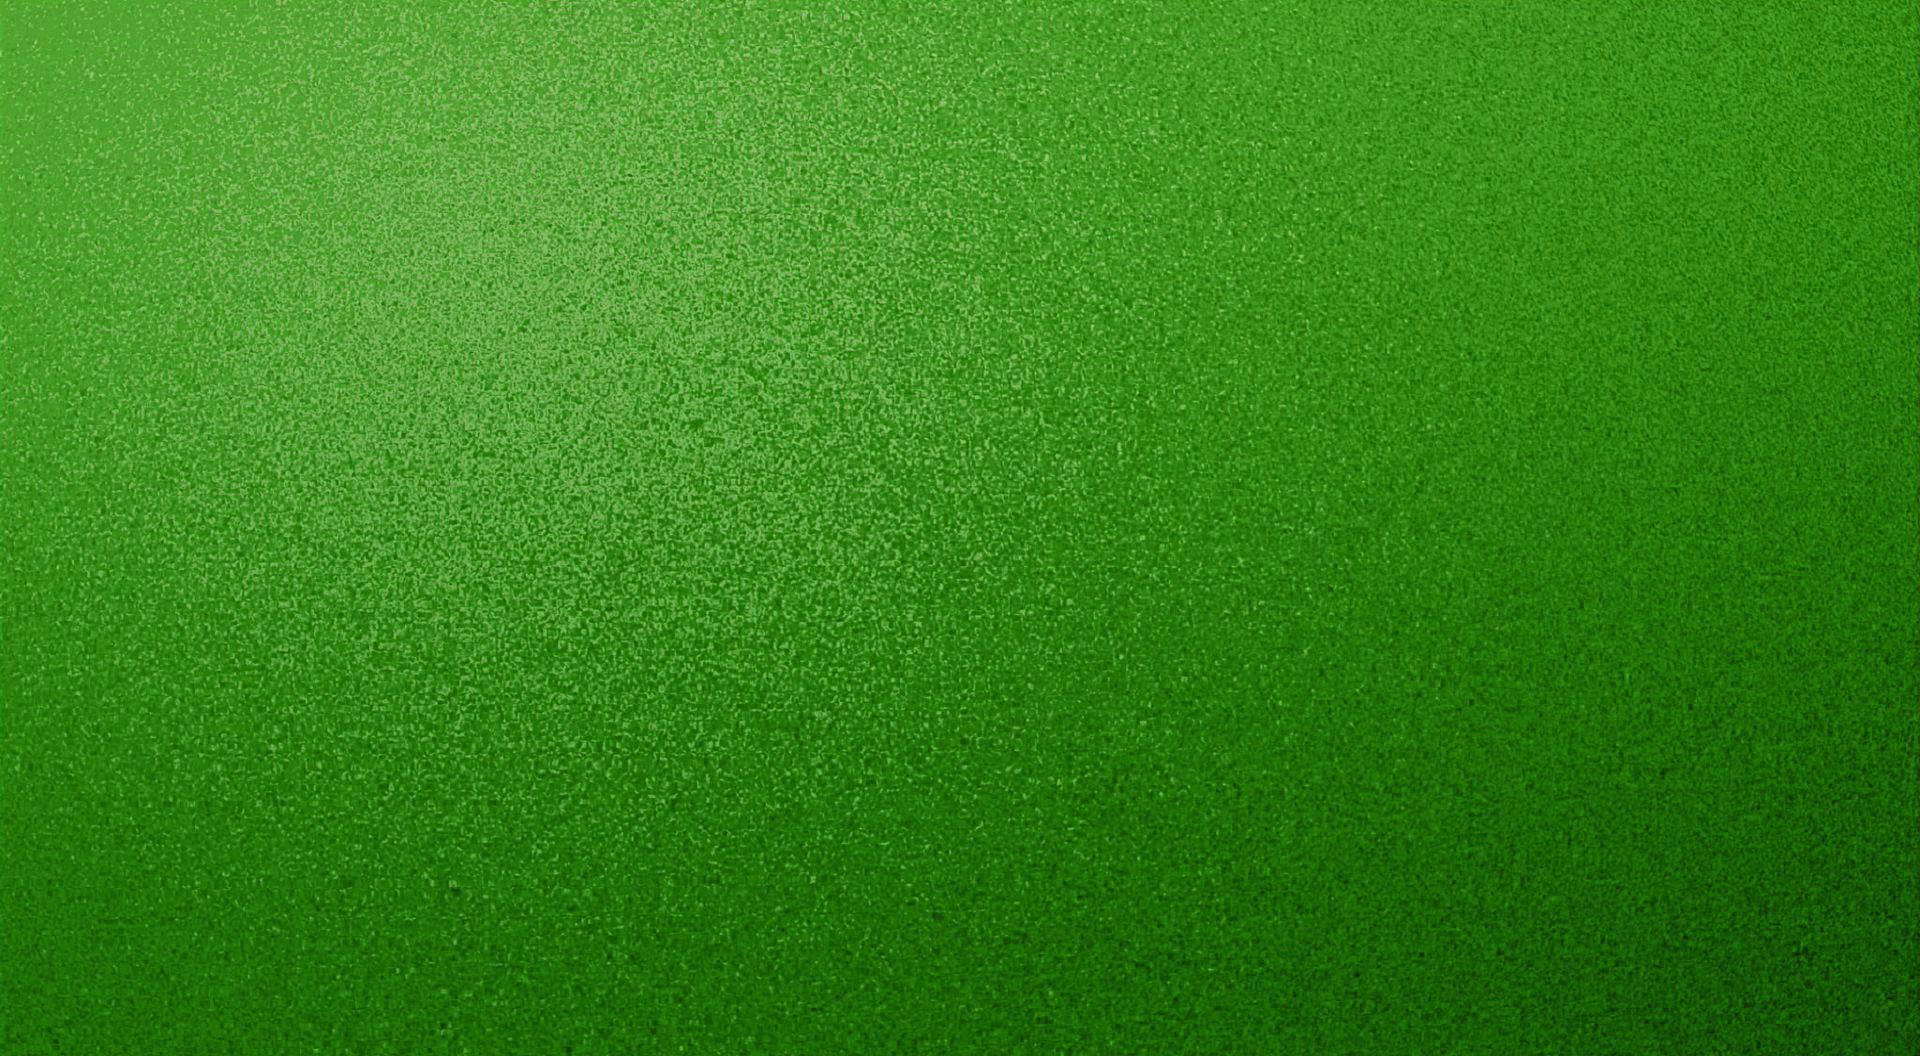 Green Textured Speckled Desktop Background Wallpaper For Use With Mac